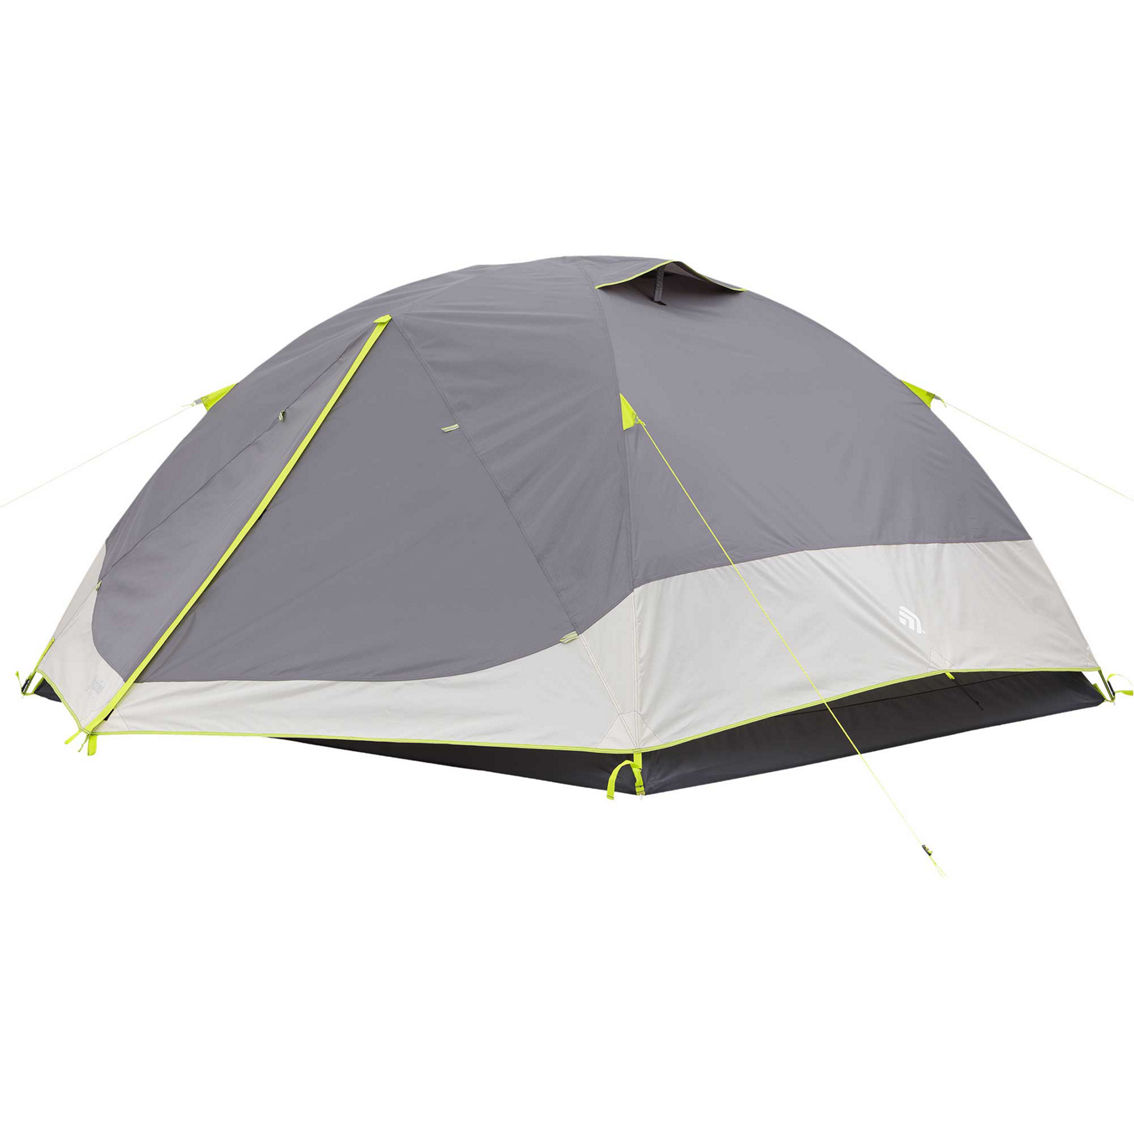 Outdoor Products 4P Backpacking Tent w/ 2 Vestibules - Image 2 of 9